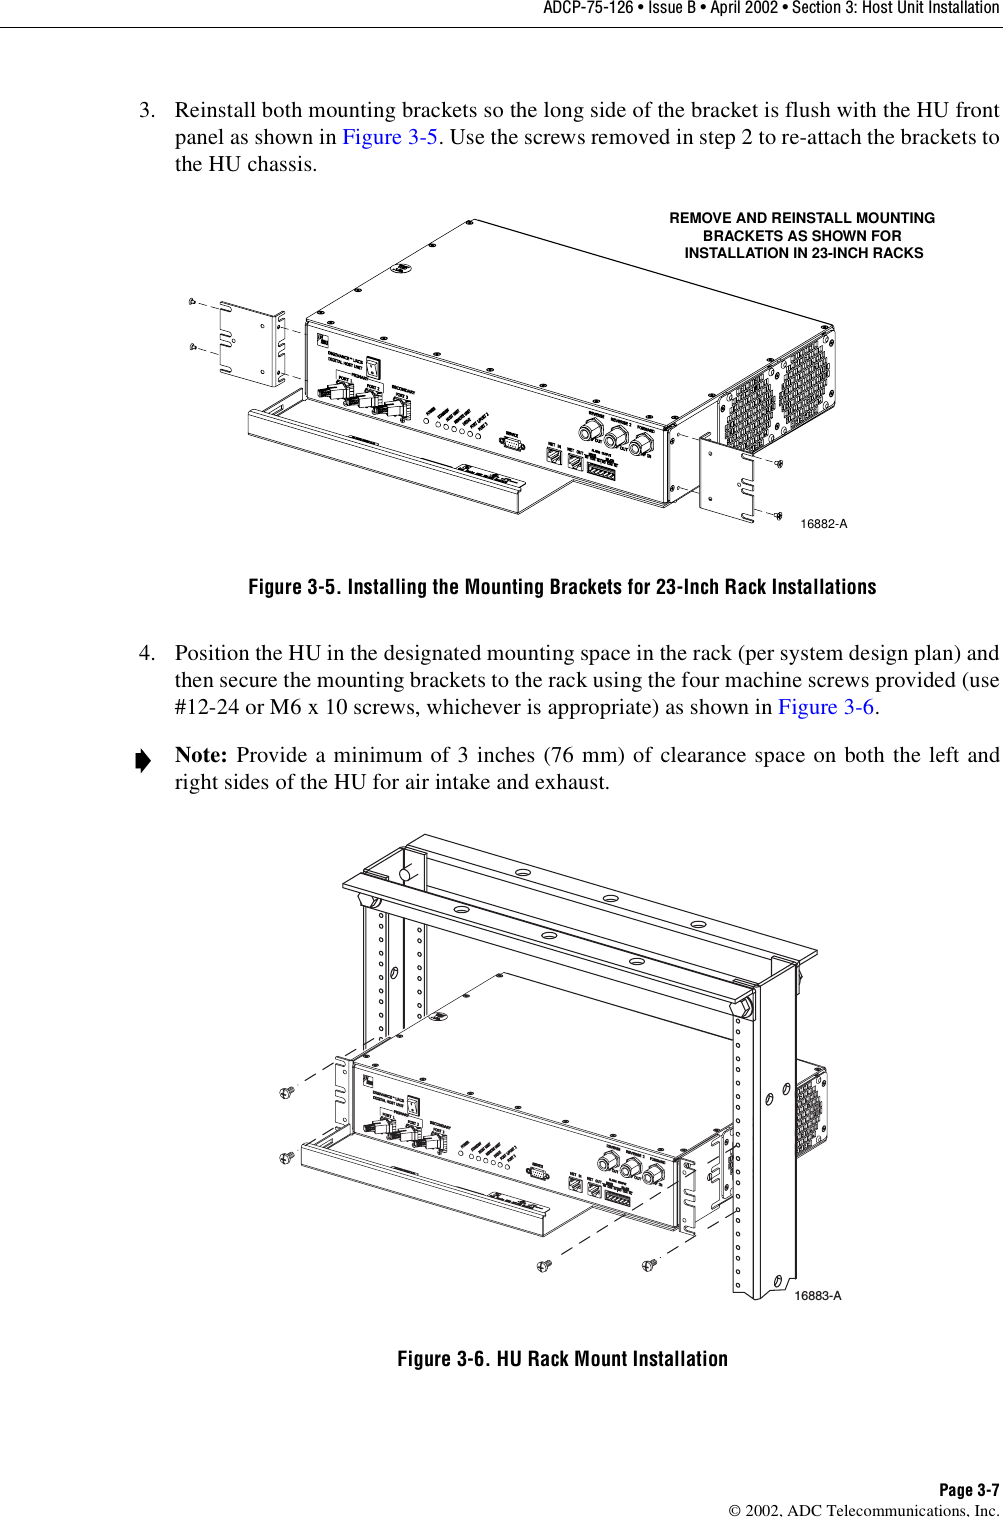 ADCP-75-126 • Issue B • April 2002 • Section 3: Host Unit InstallationPage 3-7©2002, ADC Telecommunications, Inc.3. Reinstall both mounting brackets so the long side of the bracket is flush with the HU frontpanel as shown in Figure 3-5.Use the screws removed in step 2to re-attach the brackets tothe HU chassis.Figure 3-5. Installing the Mounting Brackets for 23-Inch Rack Installations4. Position the HU in the designated mounting space in the rack (per system design plan) andthen secure the mounting brackets to the rack using the four machine screws provided (use#12-24 or M6 x10 screws, whichever is appropriate) as shown in Figure 3-6.Figure 3-6. HU Rack Mount InstallationNote: Provide aminimum of 3inches (76 mm) of clearance space on both the left andright sides of the HU for air intake and exhaust.16882-AREMOVE AND REINSTALL MOUNTINGBRACKETS AS SHOWN FOR INSTALLATION IN 23-INCH RACKS16883-A 